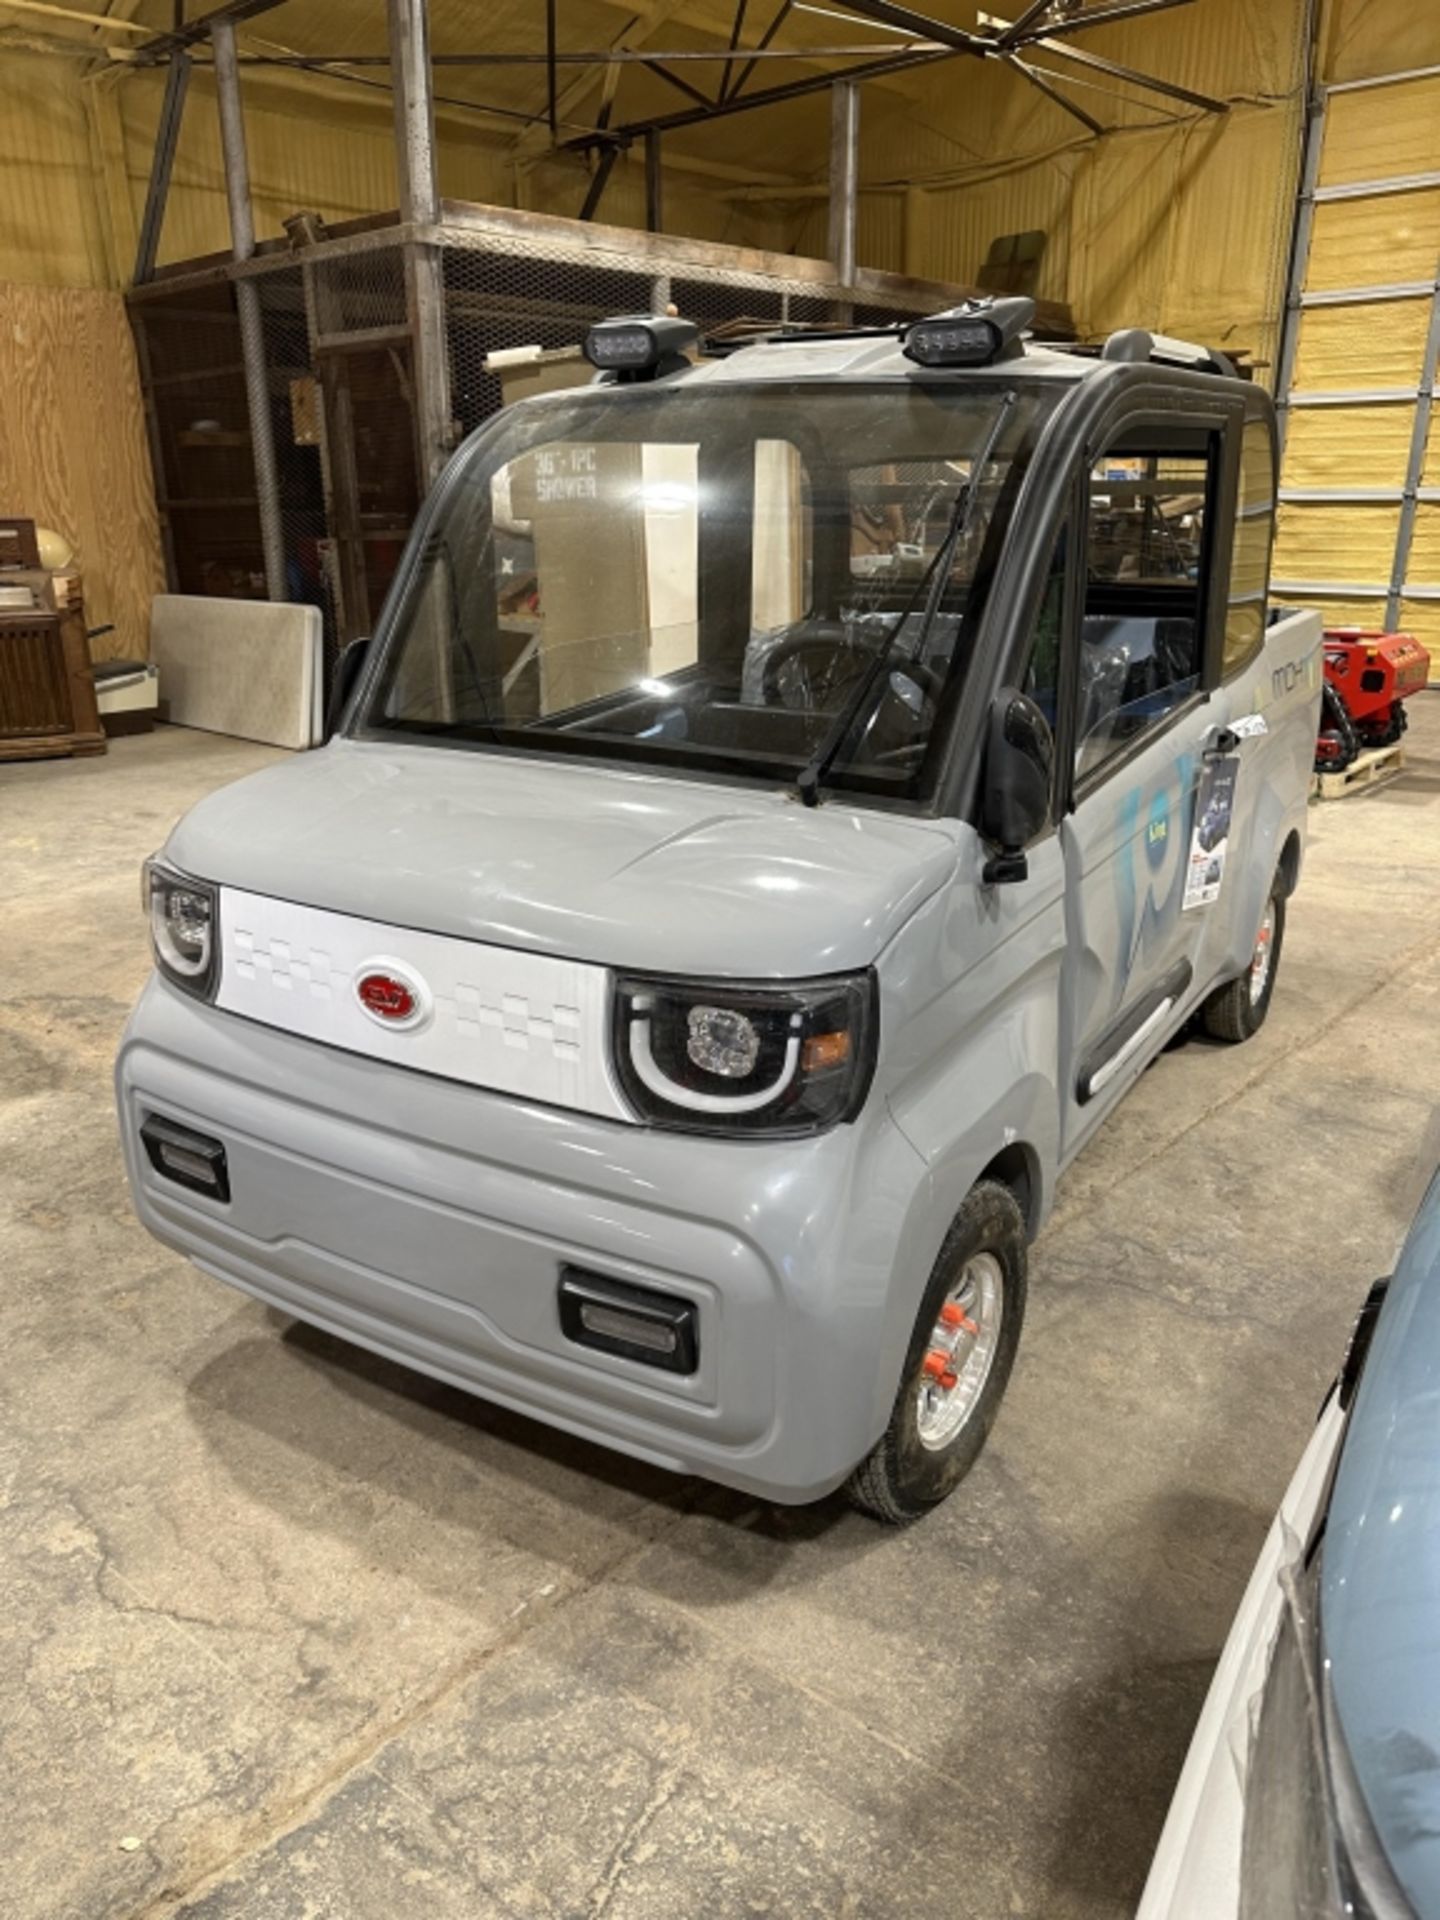 MECO 60 volt Electric Vehicle - Image 9 of 25